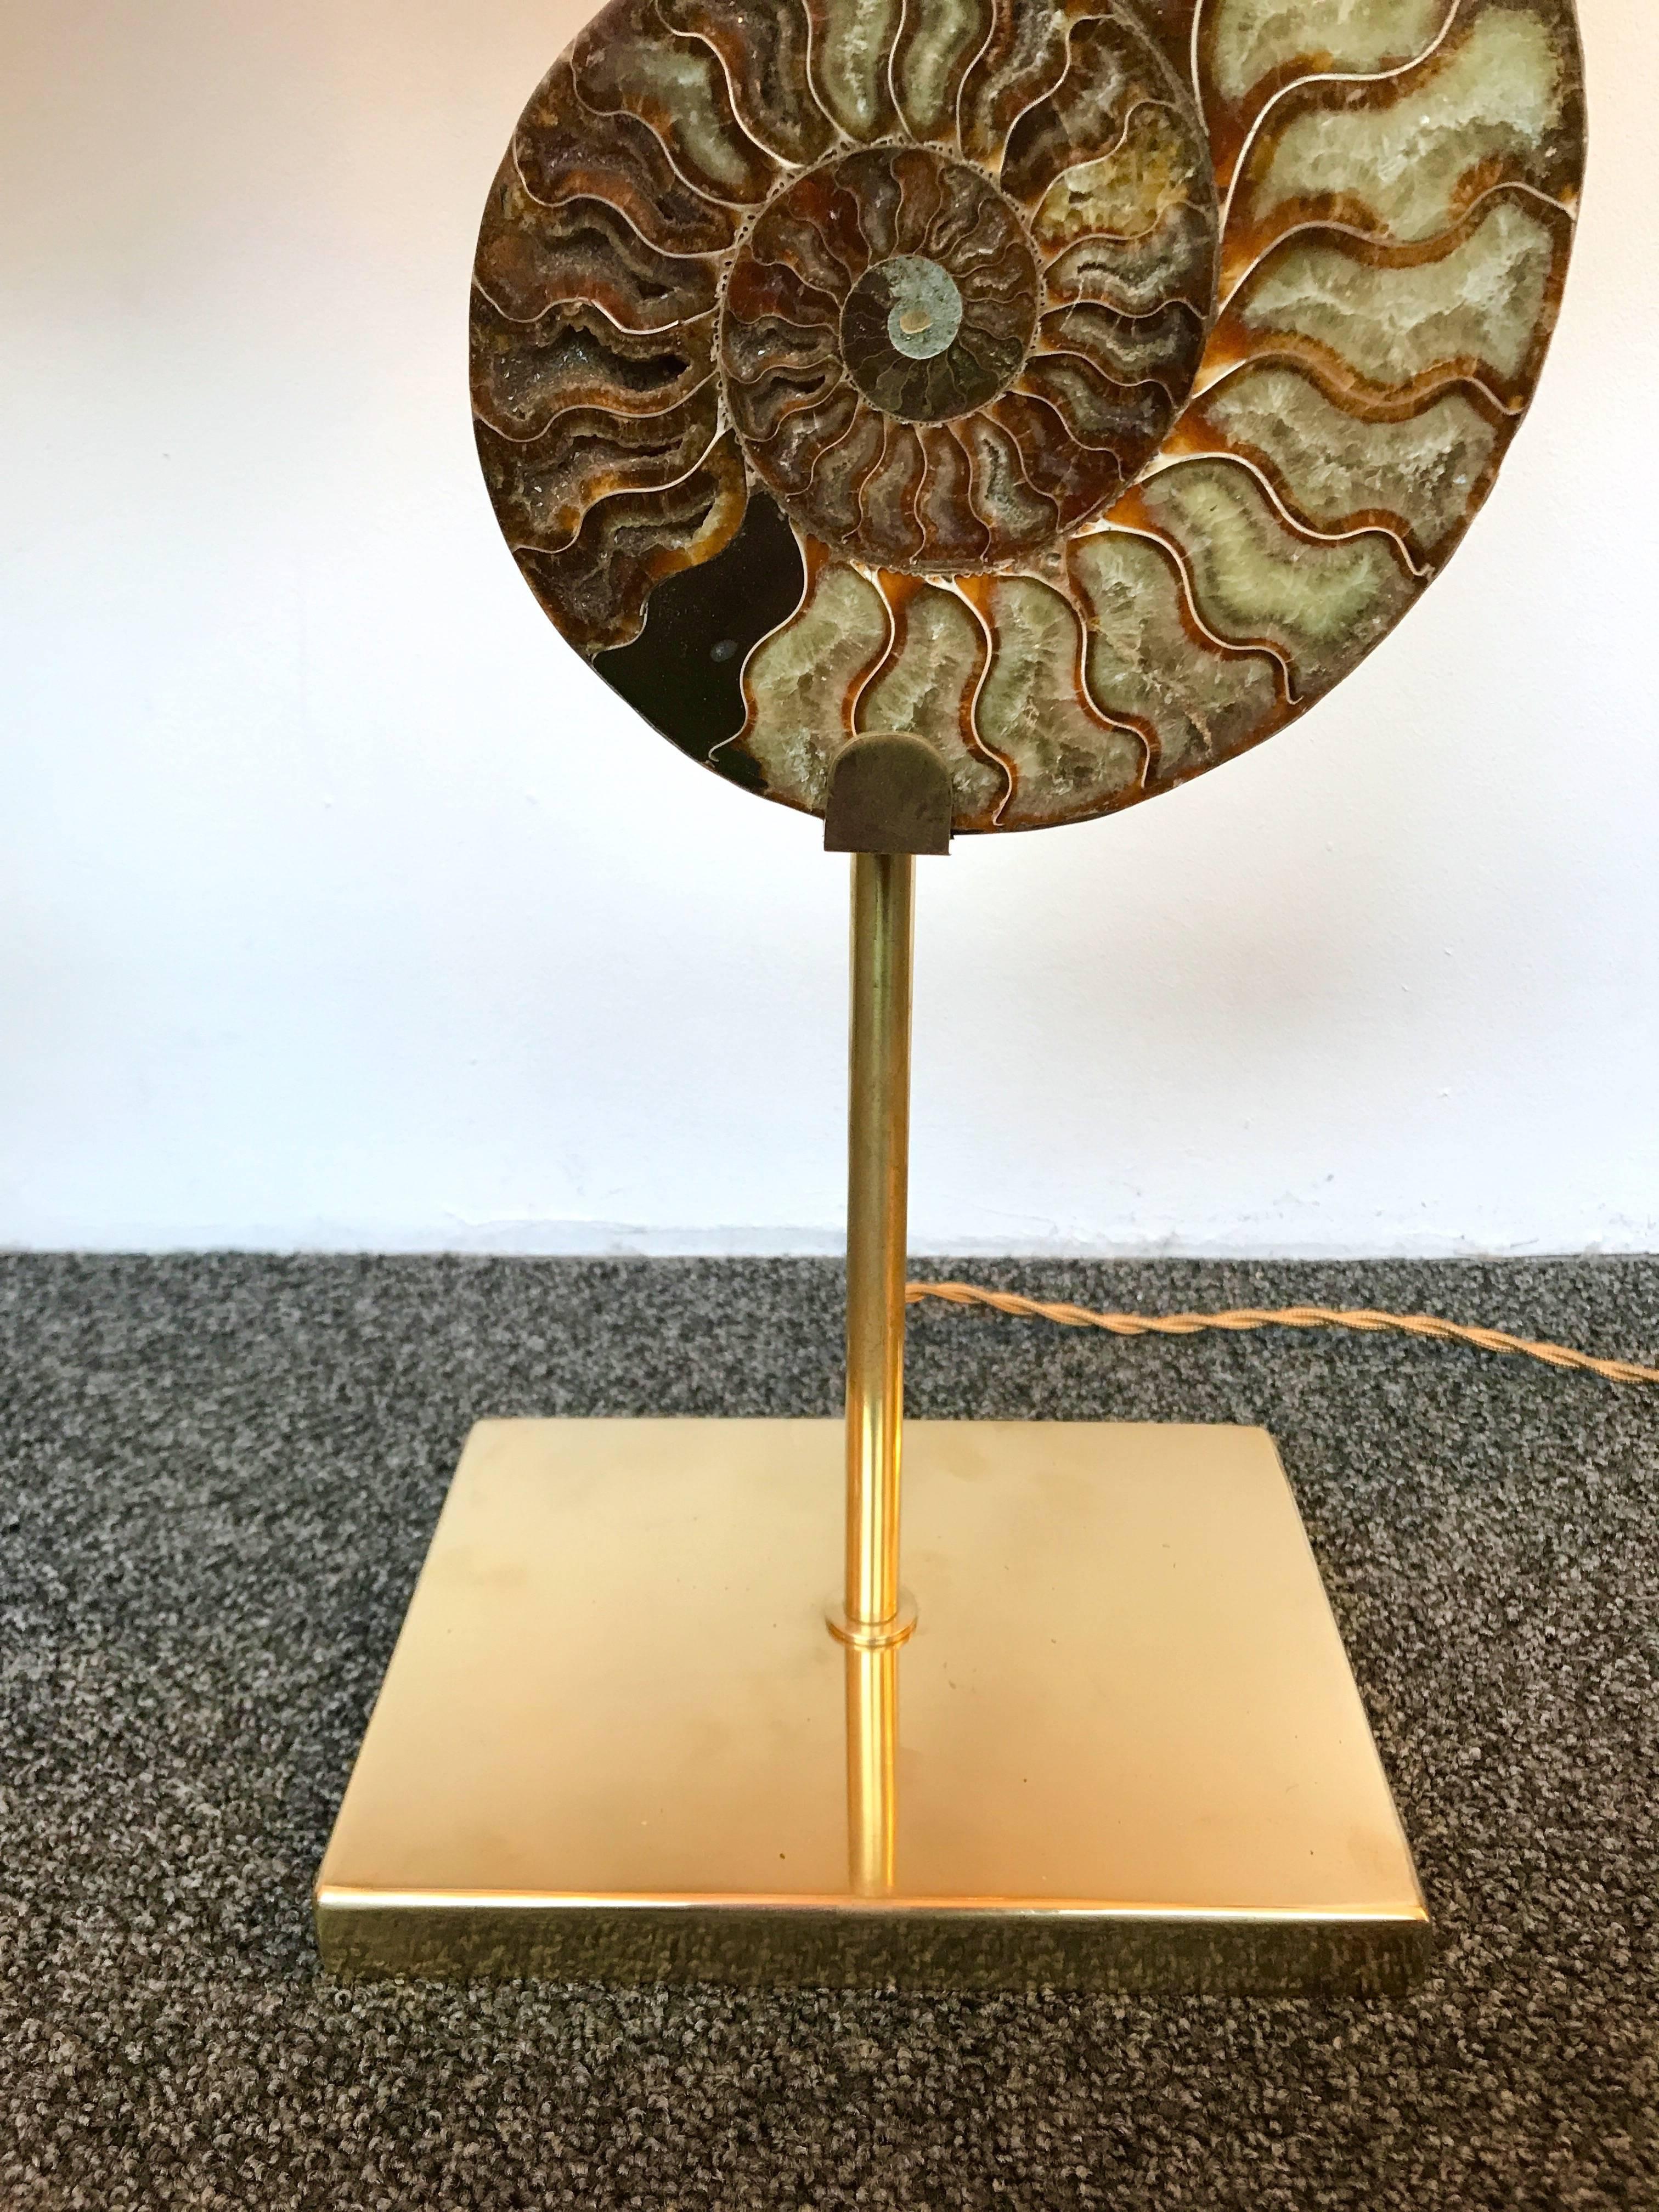 Pair of table lamps contemporary brass mounting structure with very nice pair of ammonite fossil, In the manner of the 1970s work with amethyst or rock crystal natural stone, Maison Charles, Claude de Muzac, Hollywood Regency. In the spirit of